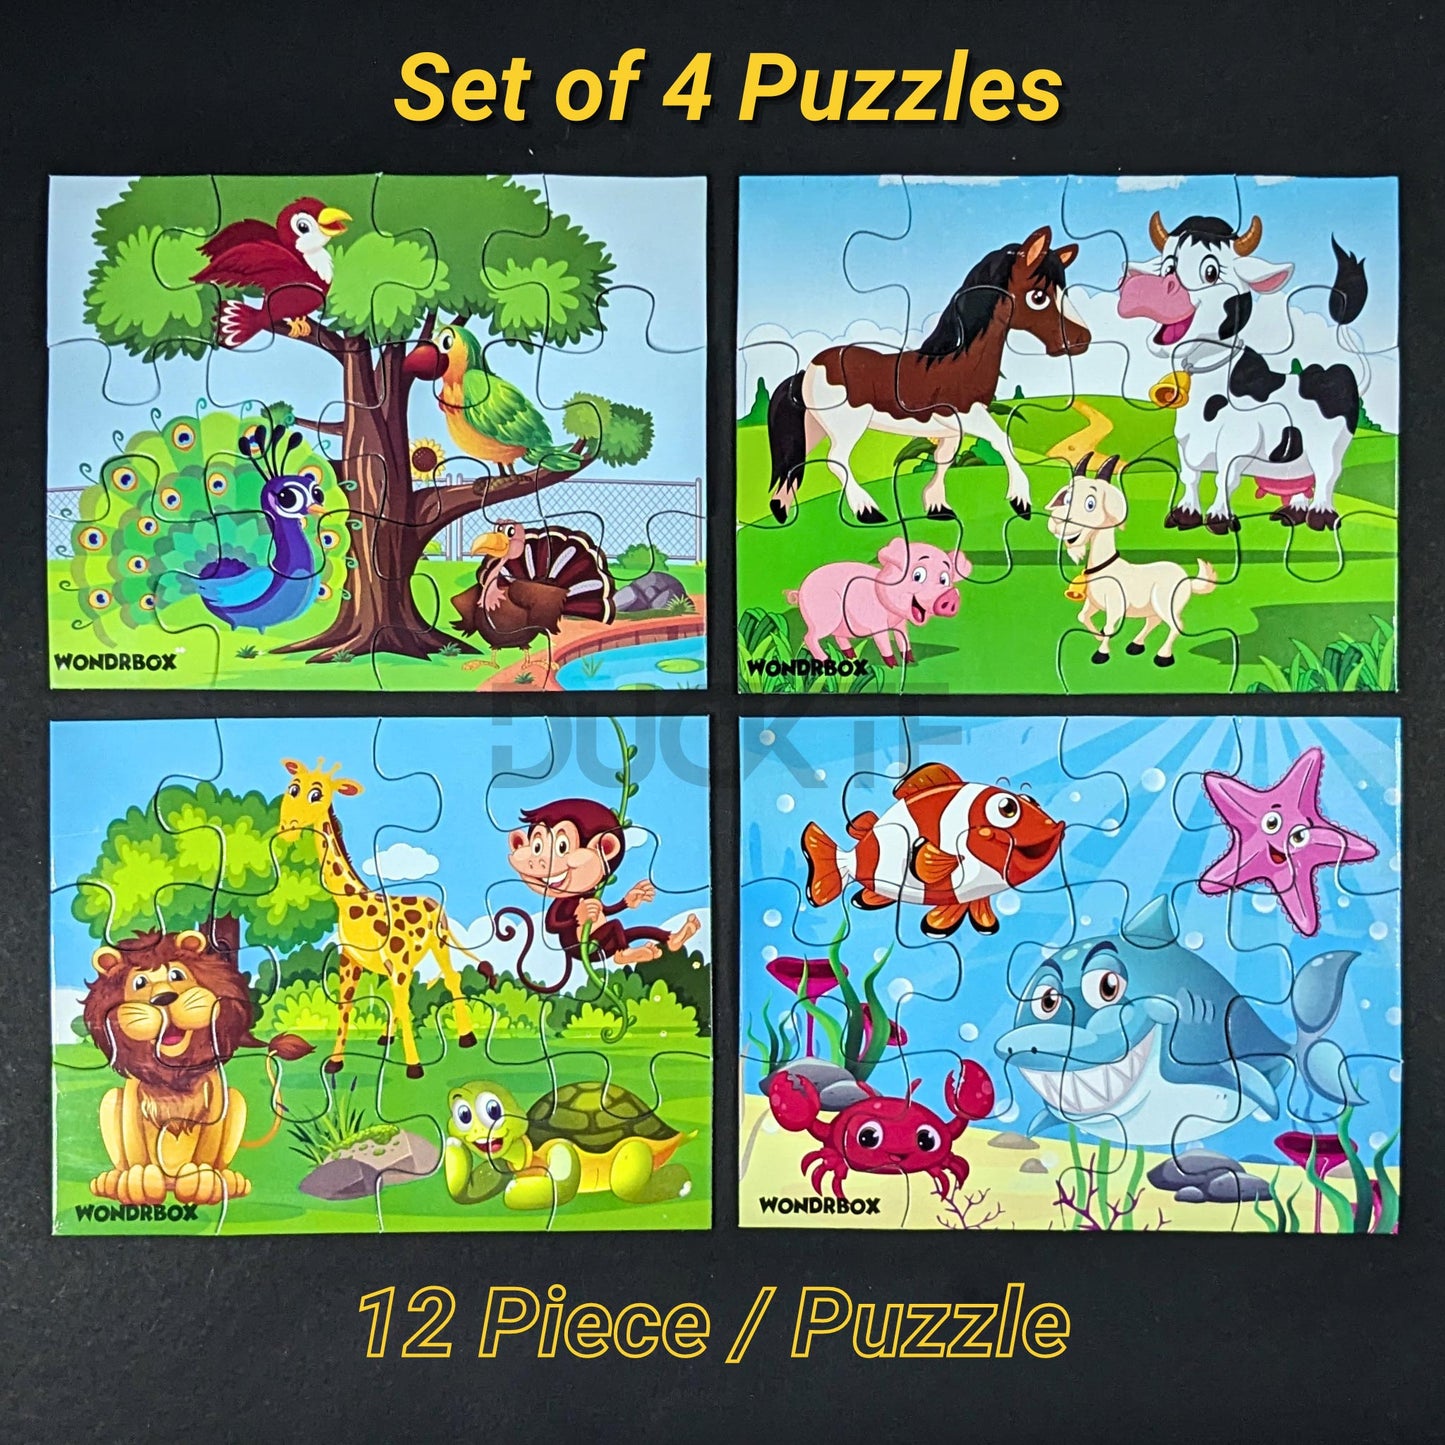 Animals and Birds Jigsaw Puzzles for kids